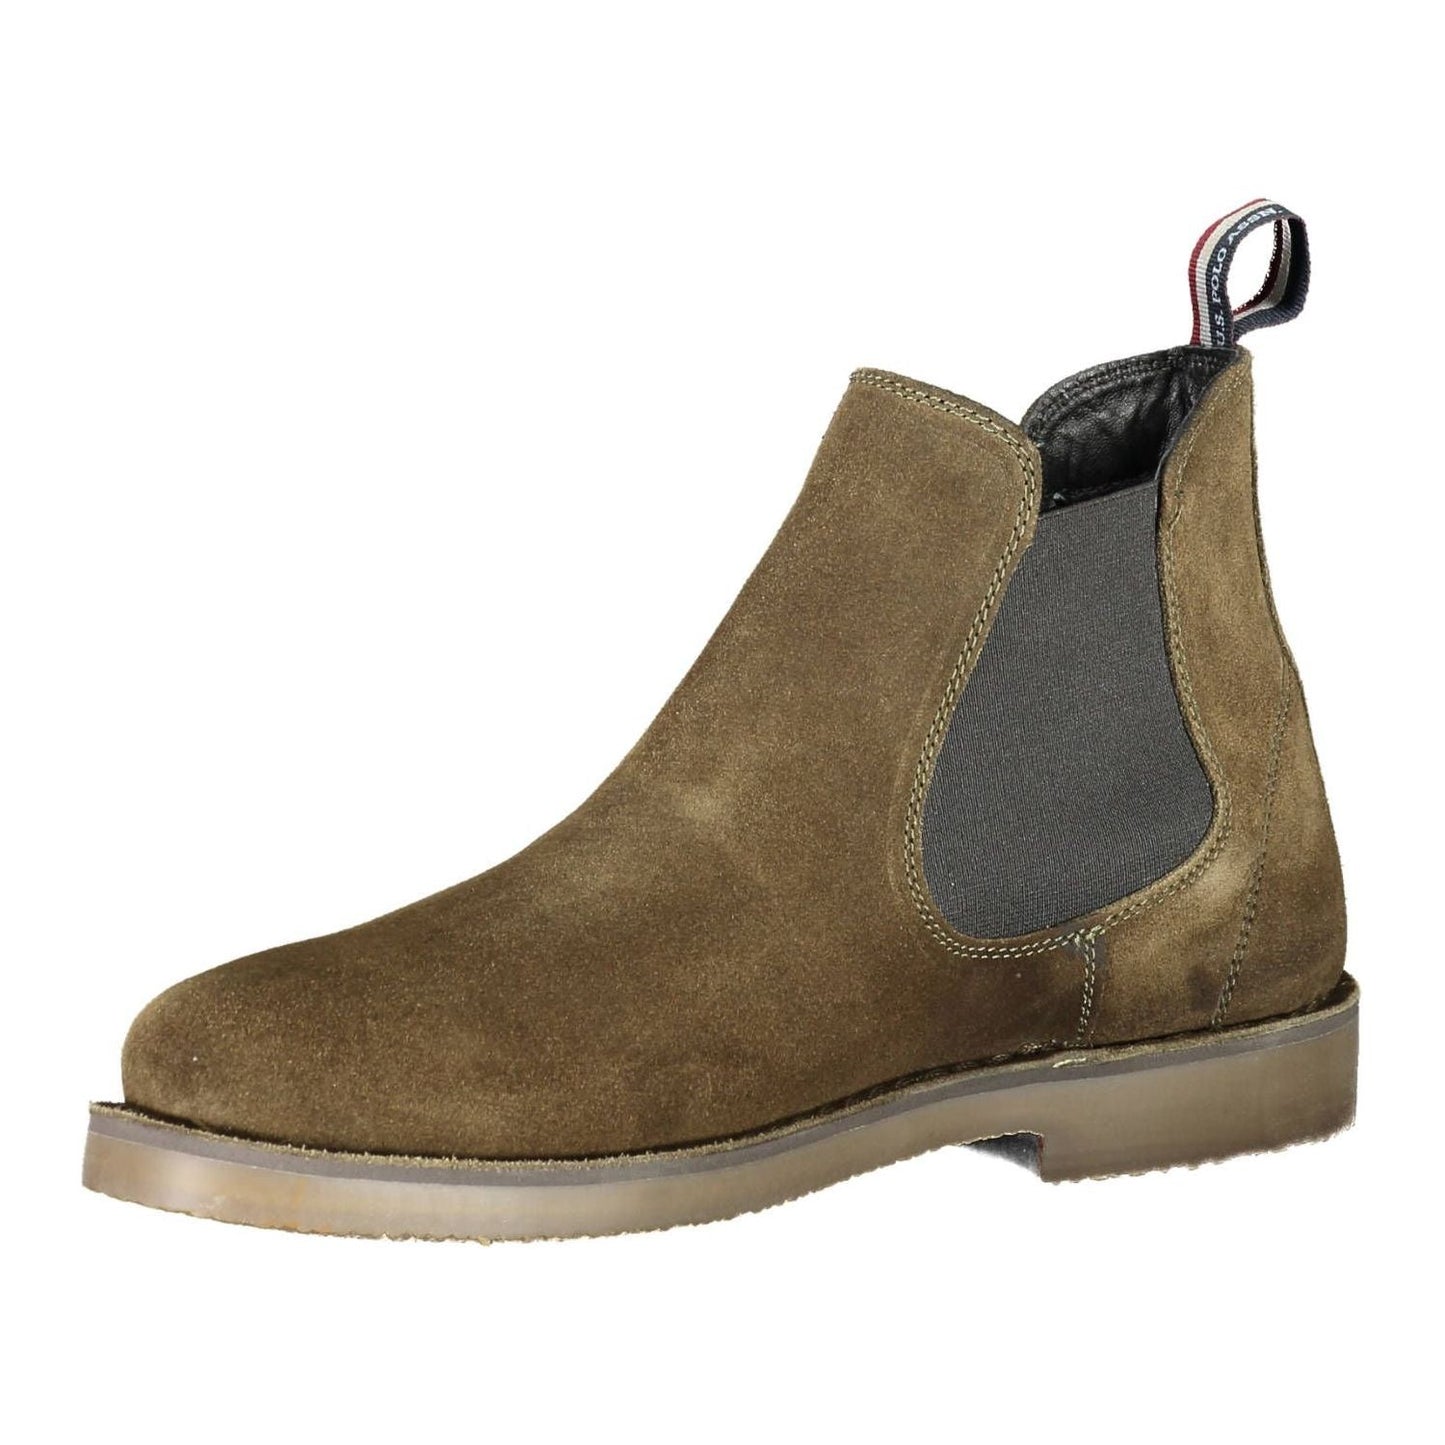 U.S. POLO ASSN.Chic Green Ankle Boots with Logo DetailMcRichard Designer Brands£99.00